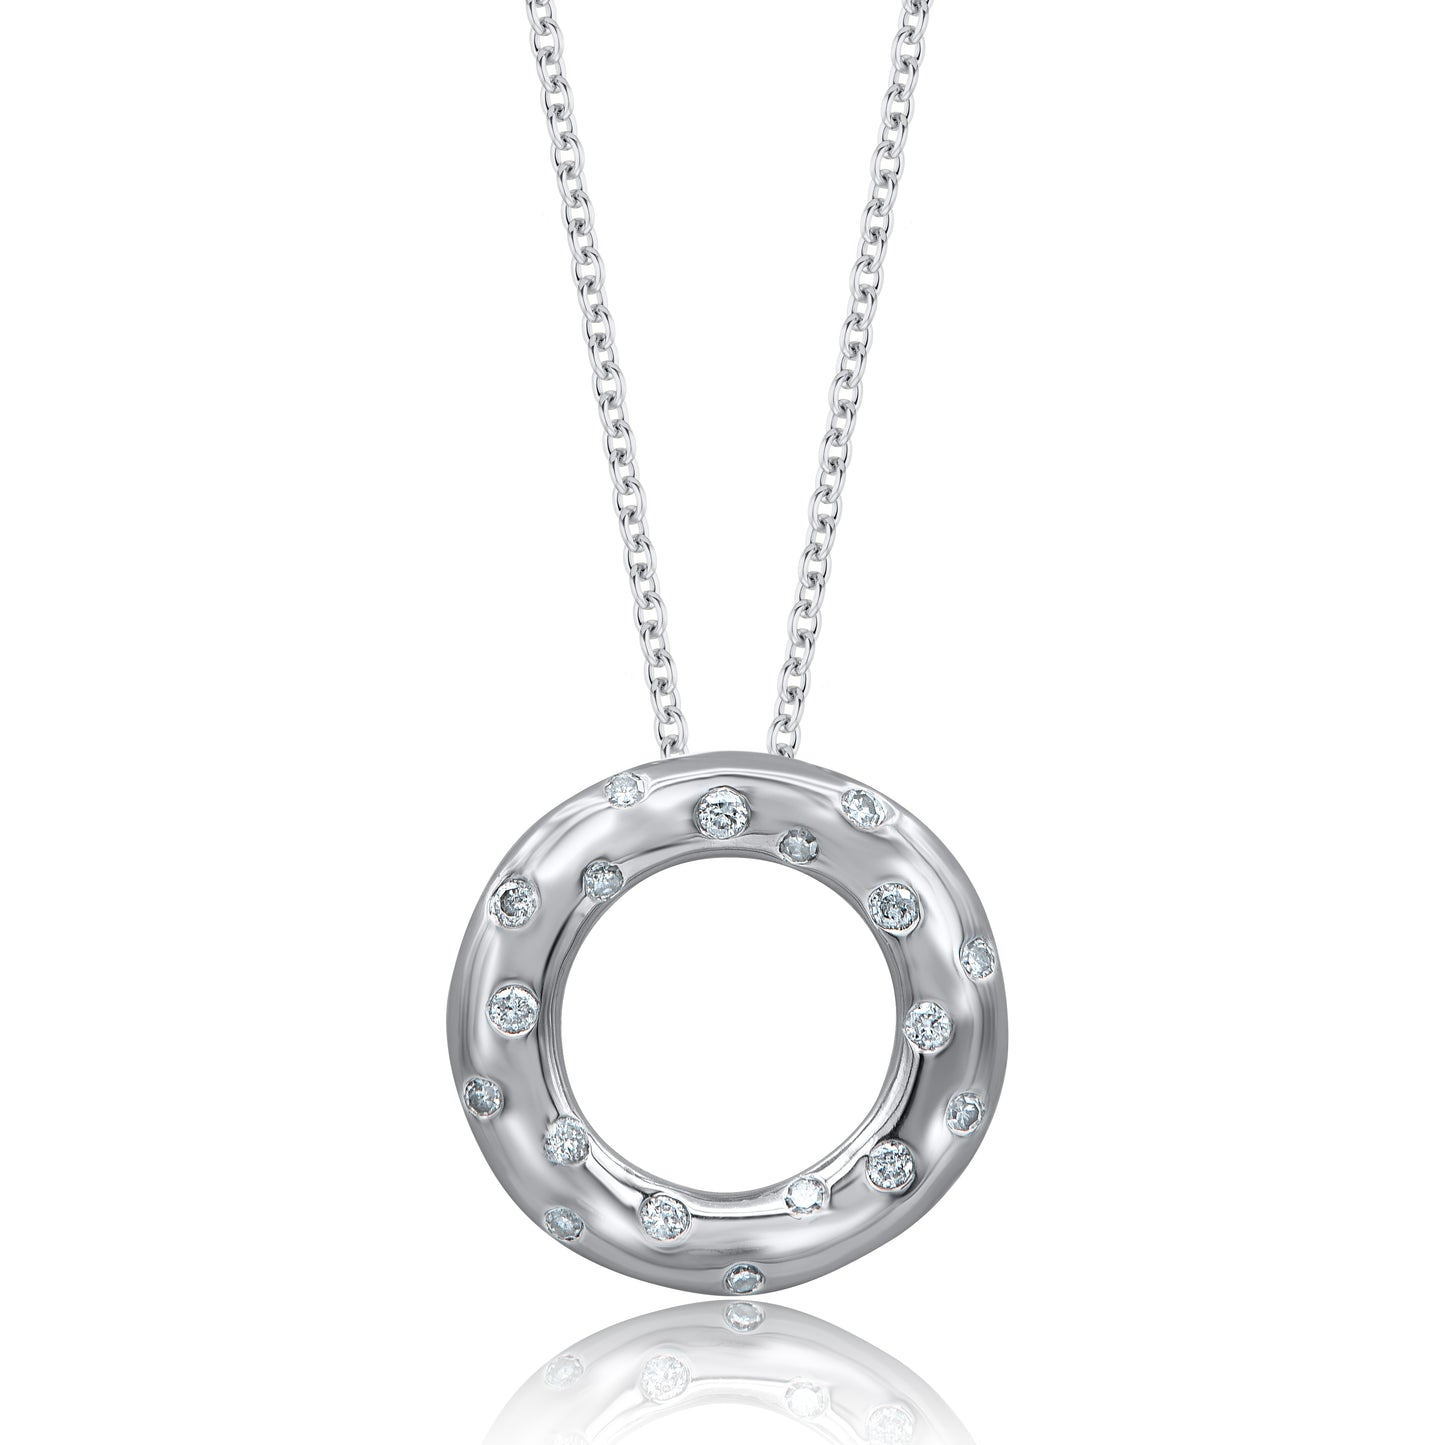 Donut Circle Swiss Set Pendant Necklace in 925 Sterling Silver